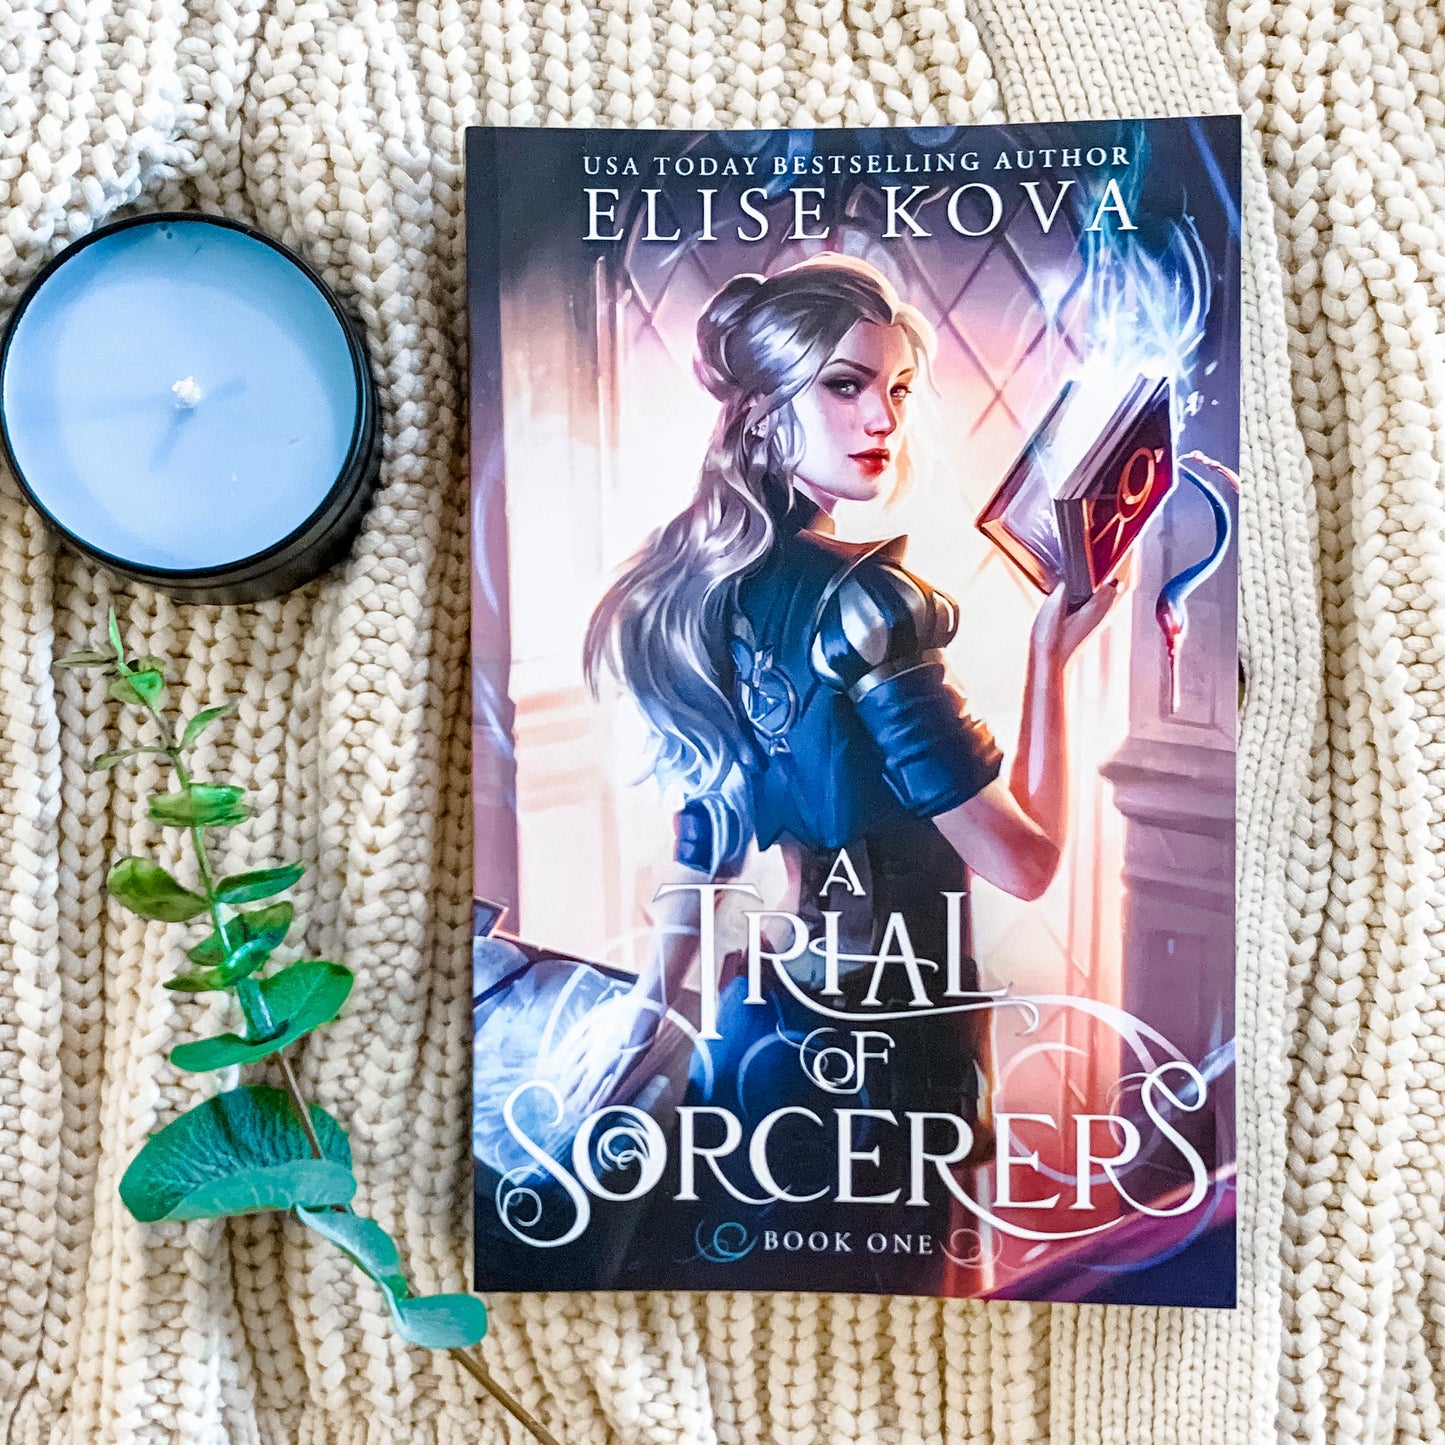 A Trial of Sorcerers Series by Elise Kova